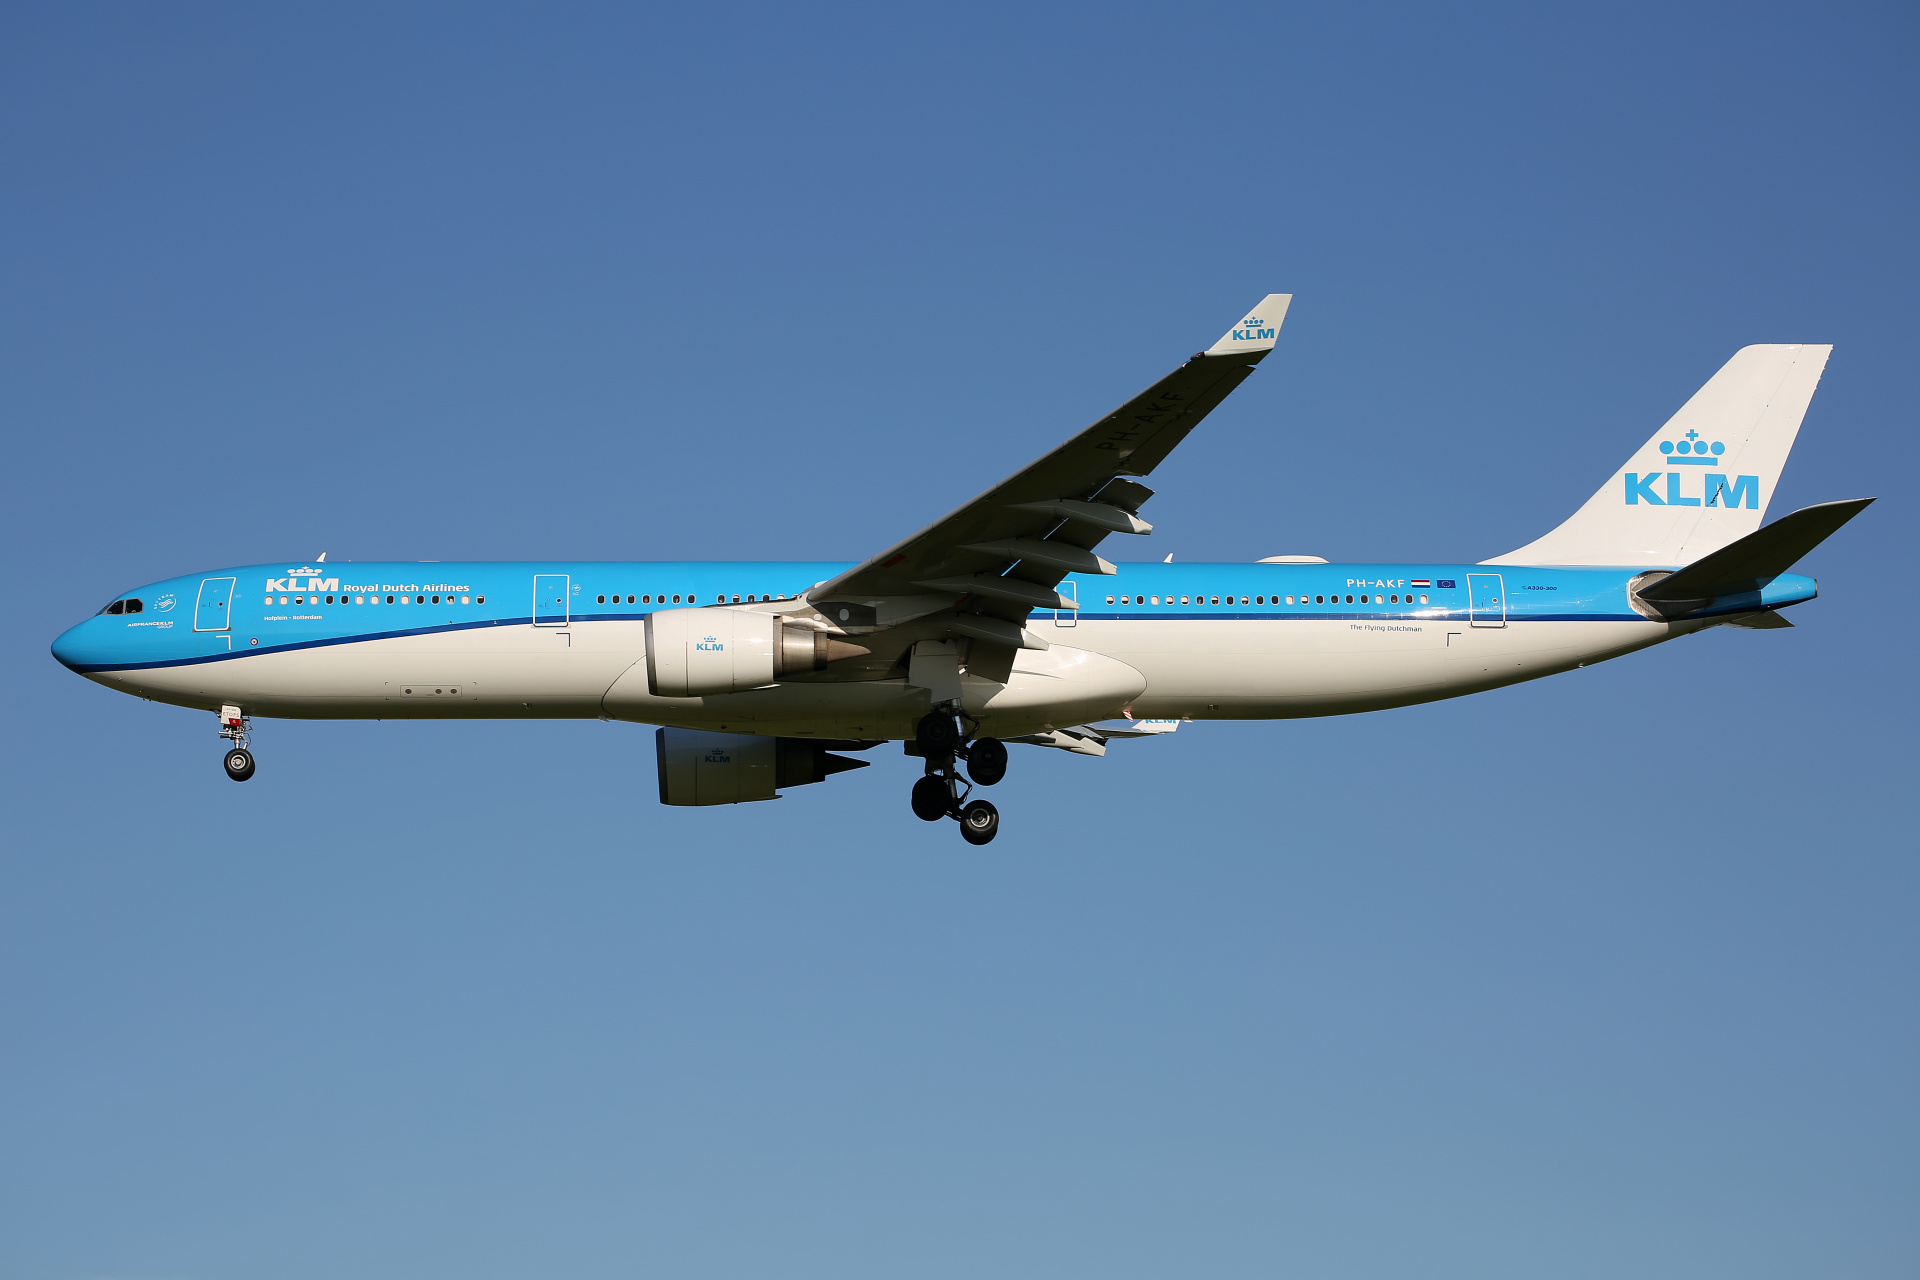 PH-AKF (new livery) (Aircraft » Schiphol Spotting » Airbus A330-300 » KLM Royal Dutch Airlines)